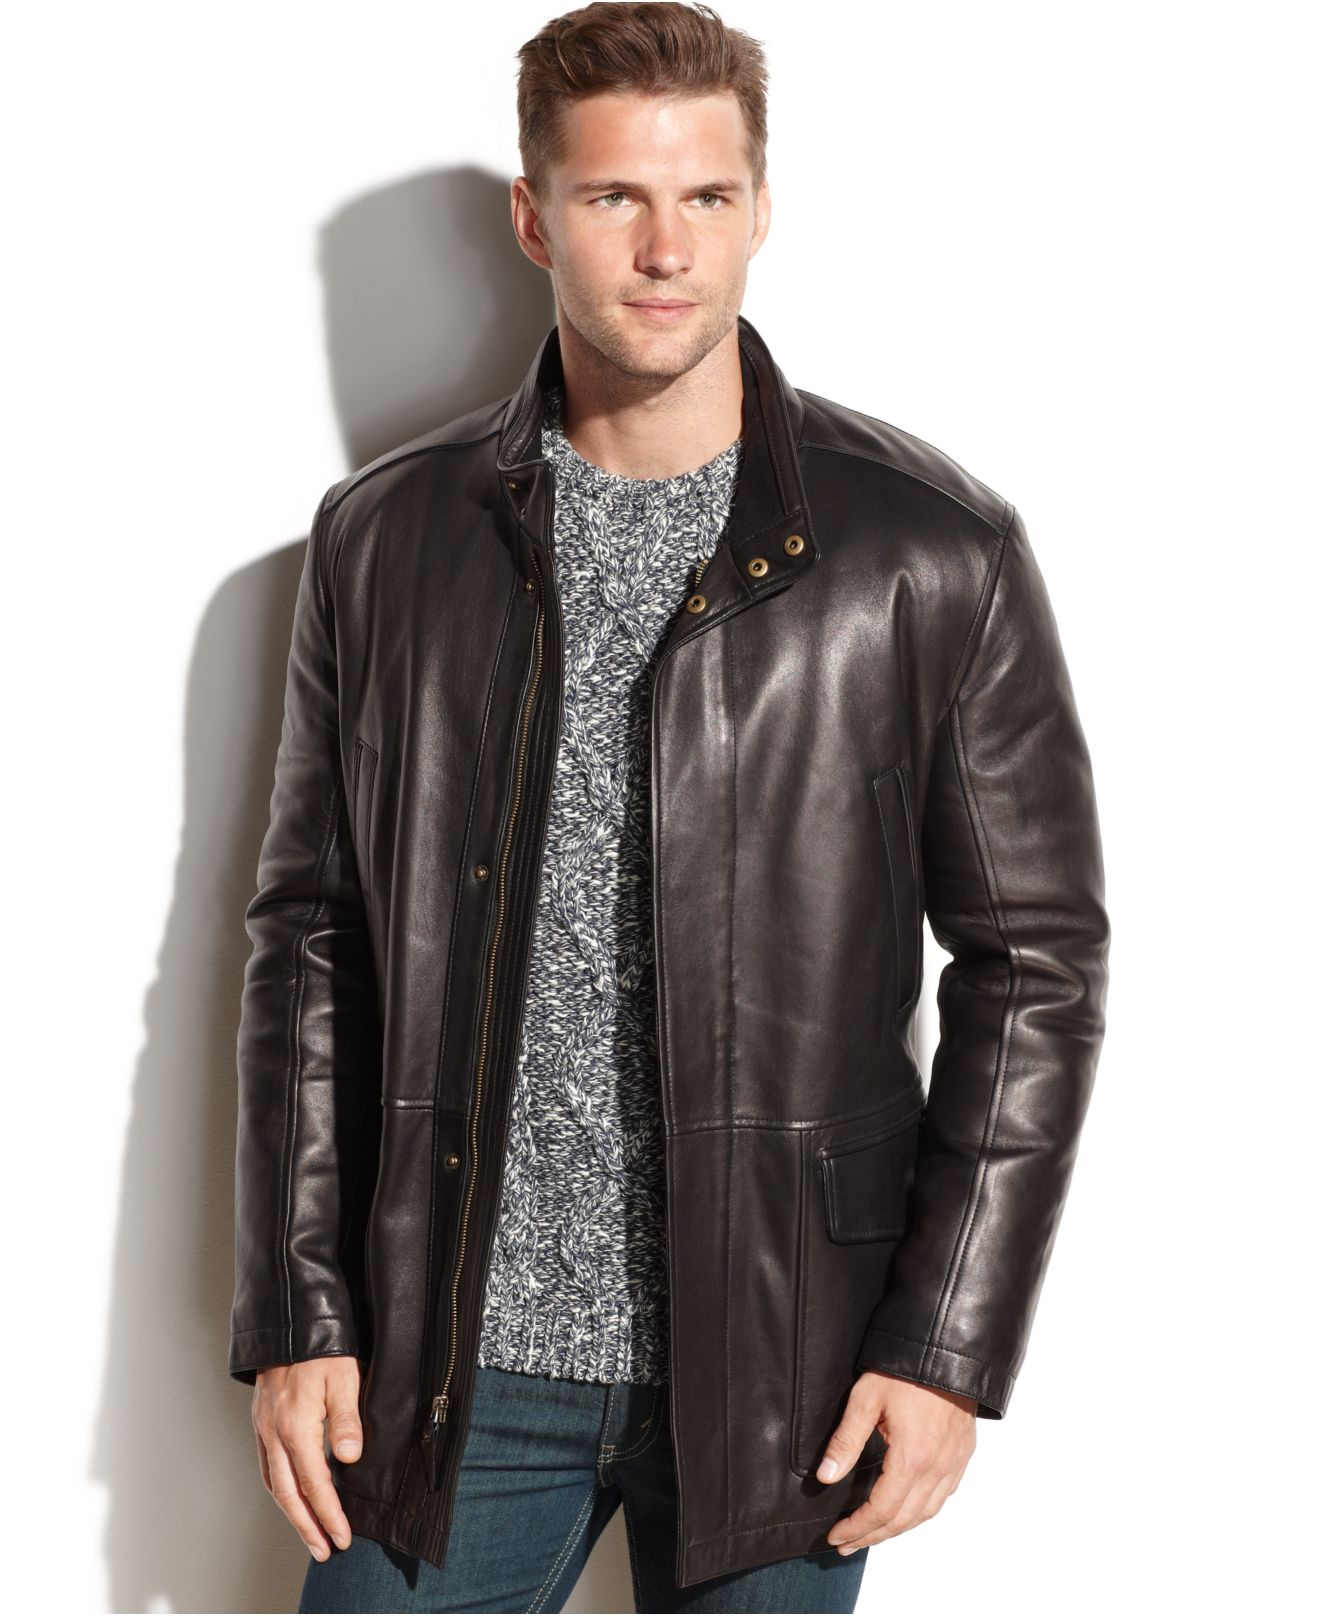 Cole Haan Smooth Leather Car Coat in Black for Men - Lyst